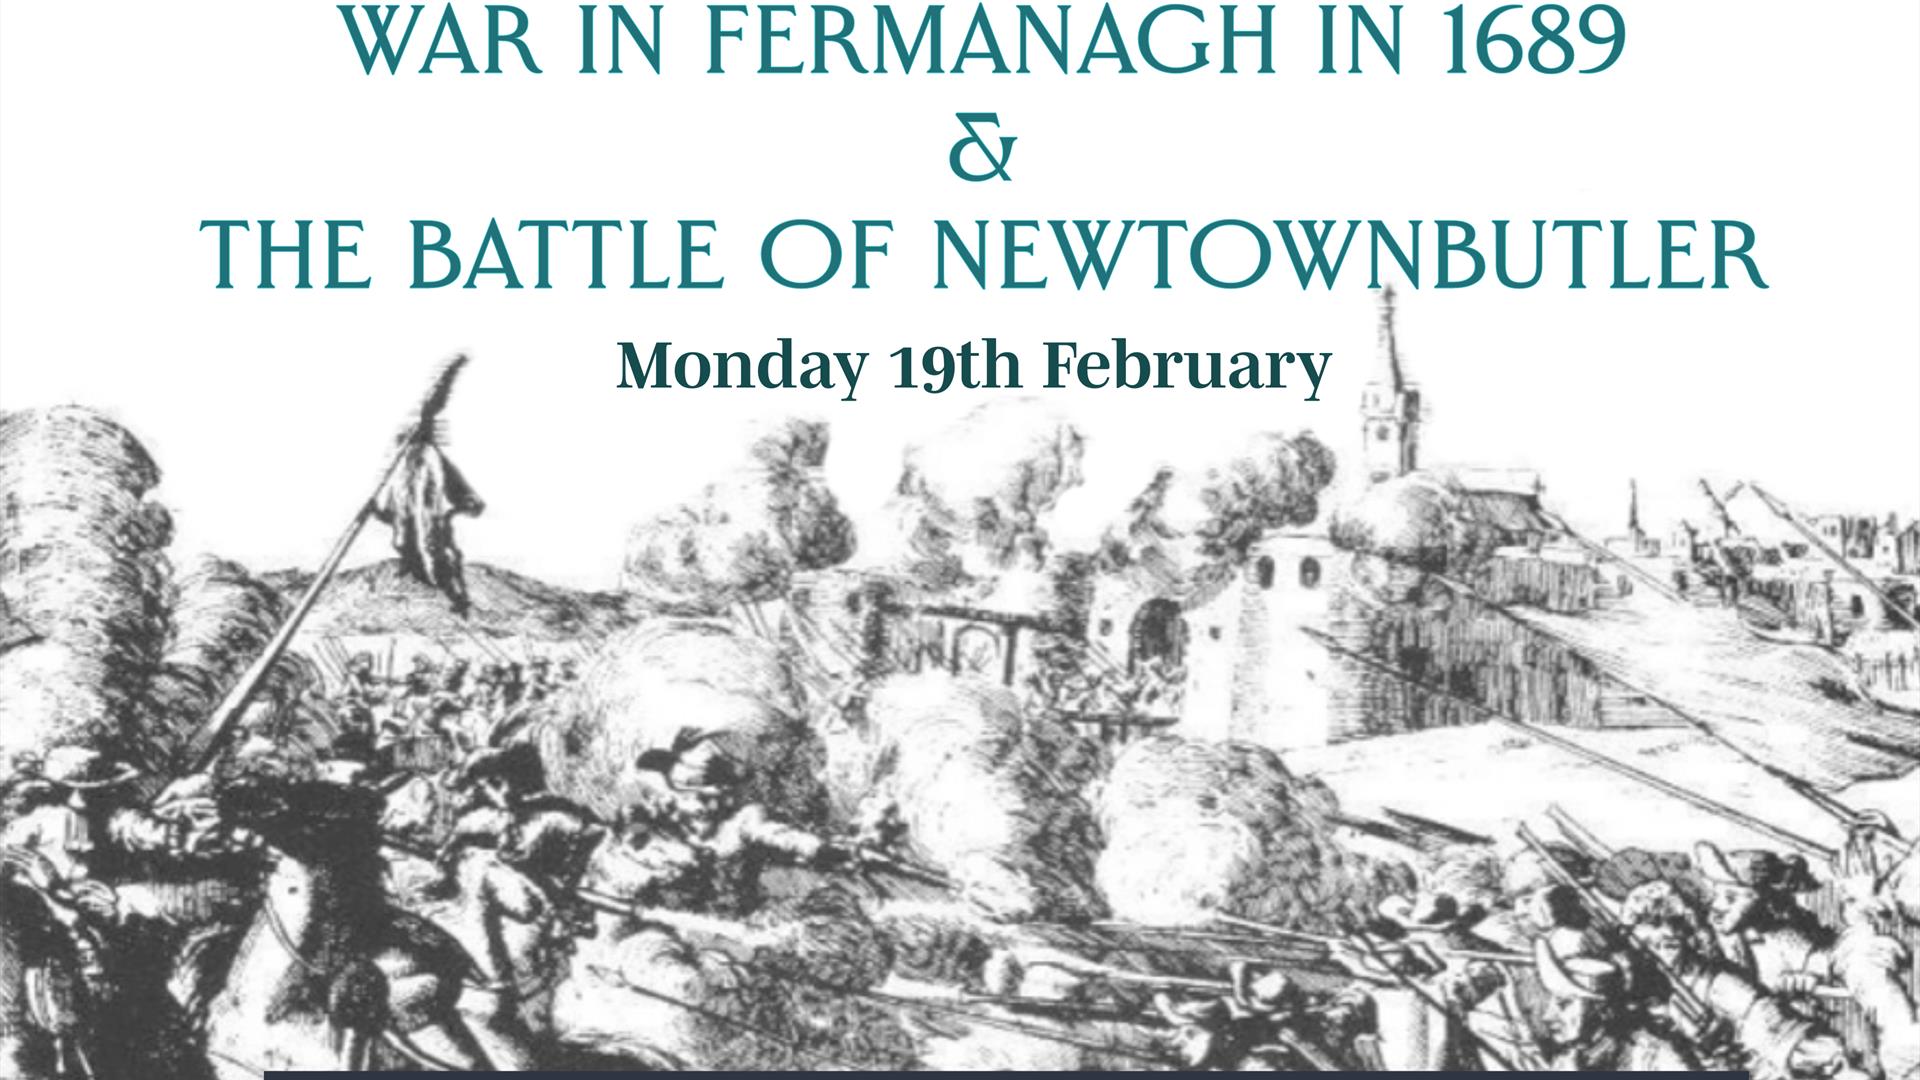 poster promoting a history talk about the Battle of Newtownbutler